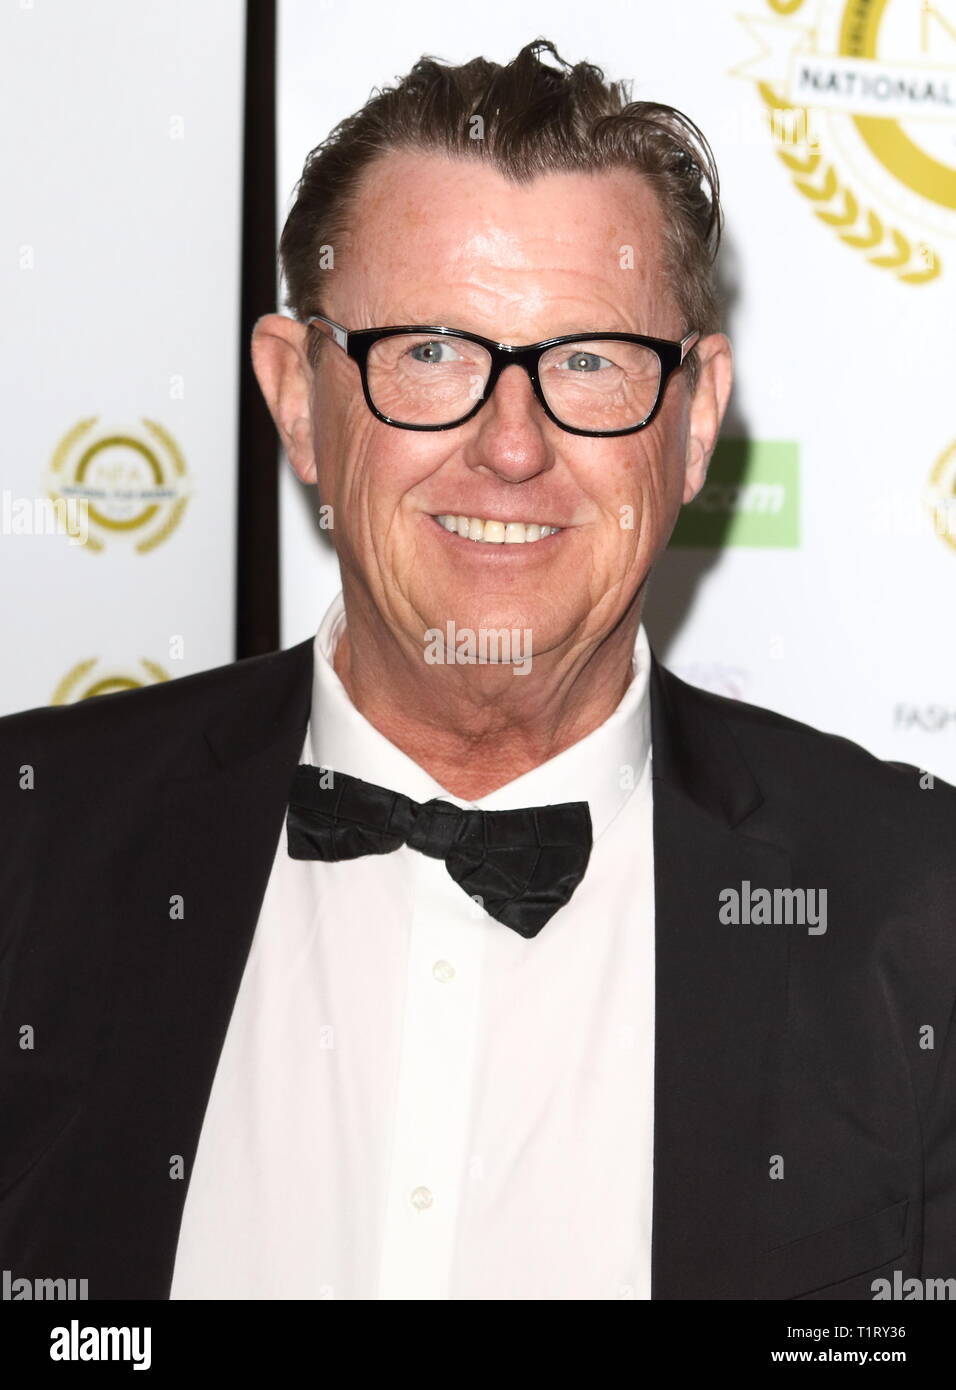 Kevin Kennedy arrives at the National Film Awards 2018 at the Porchester Hall Stock Photo